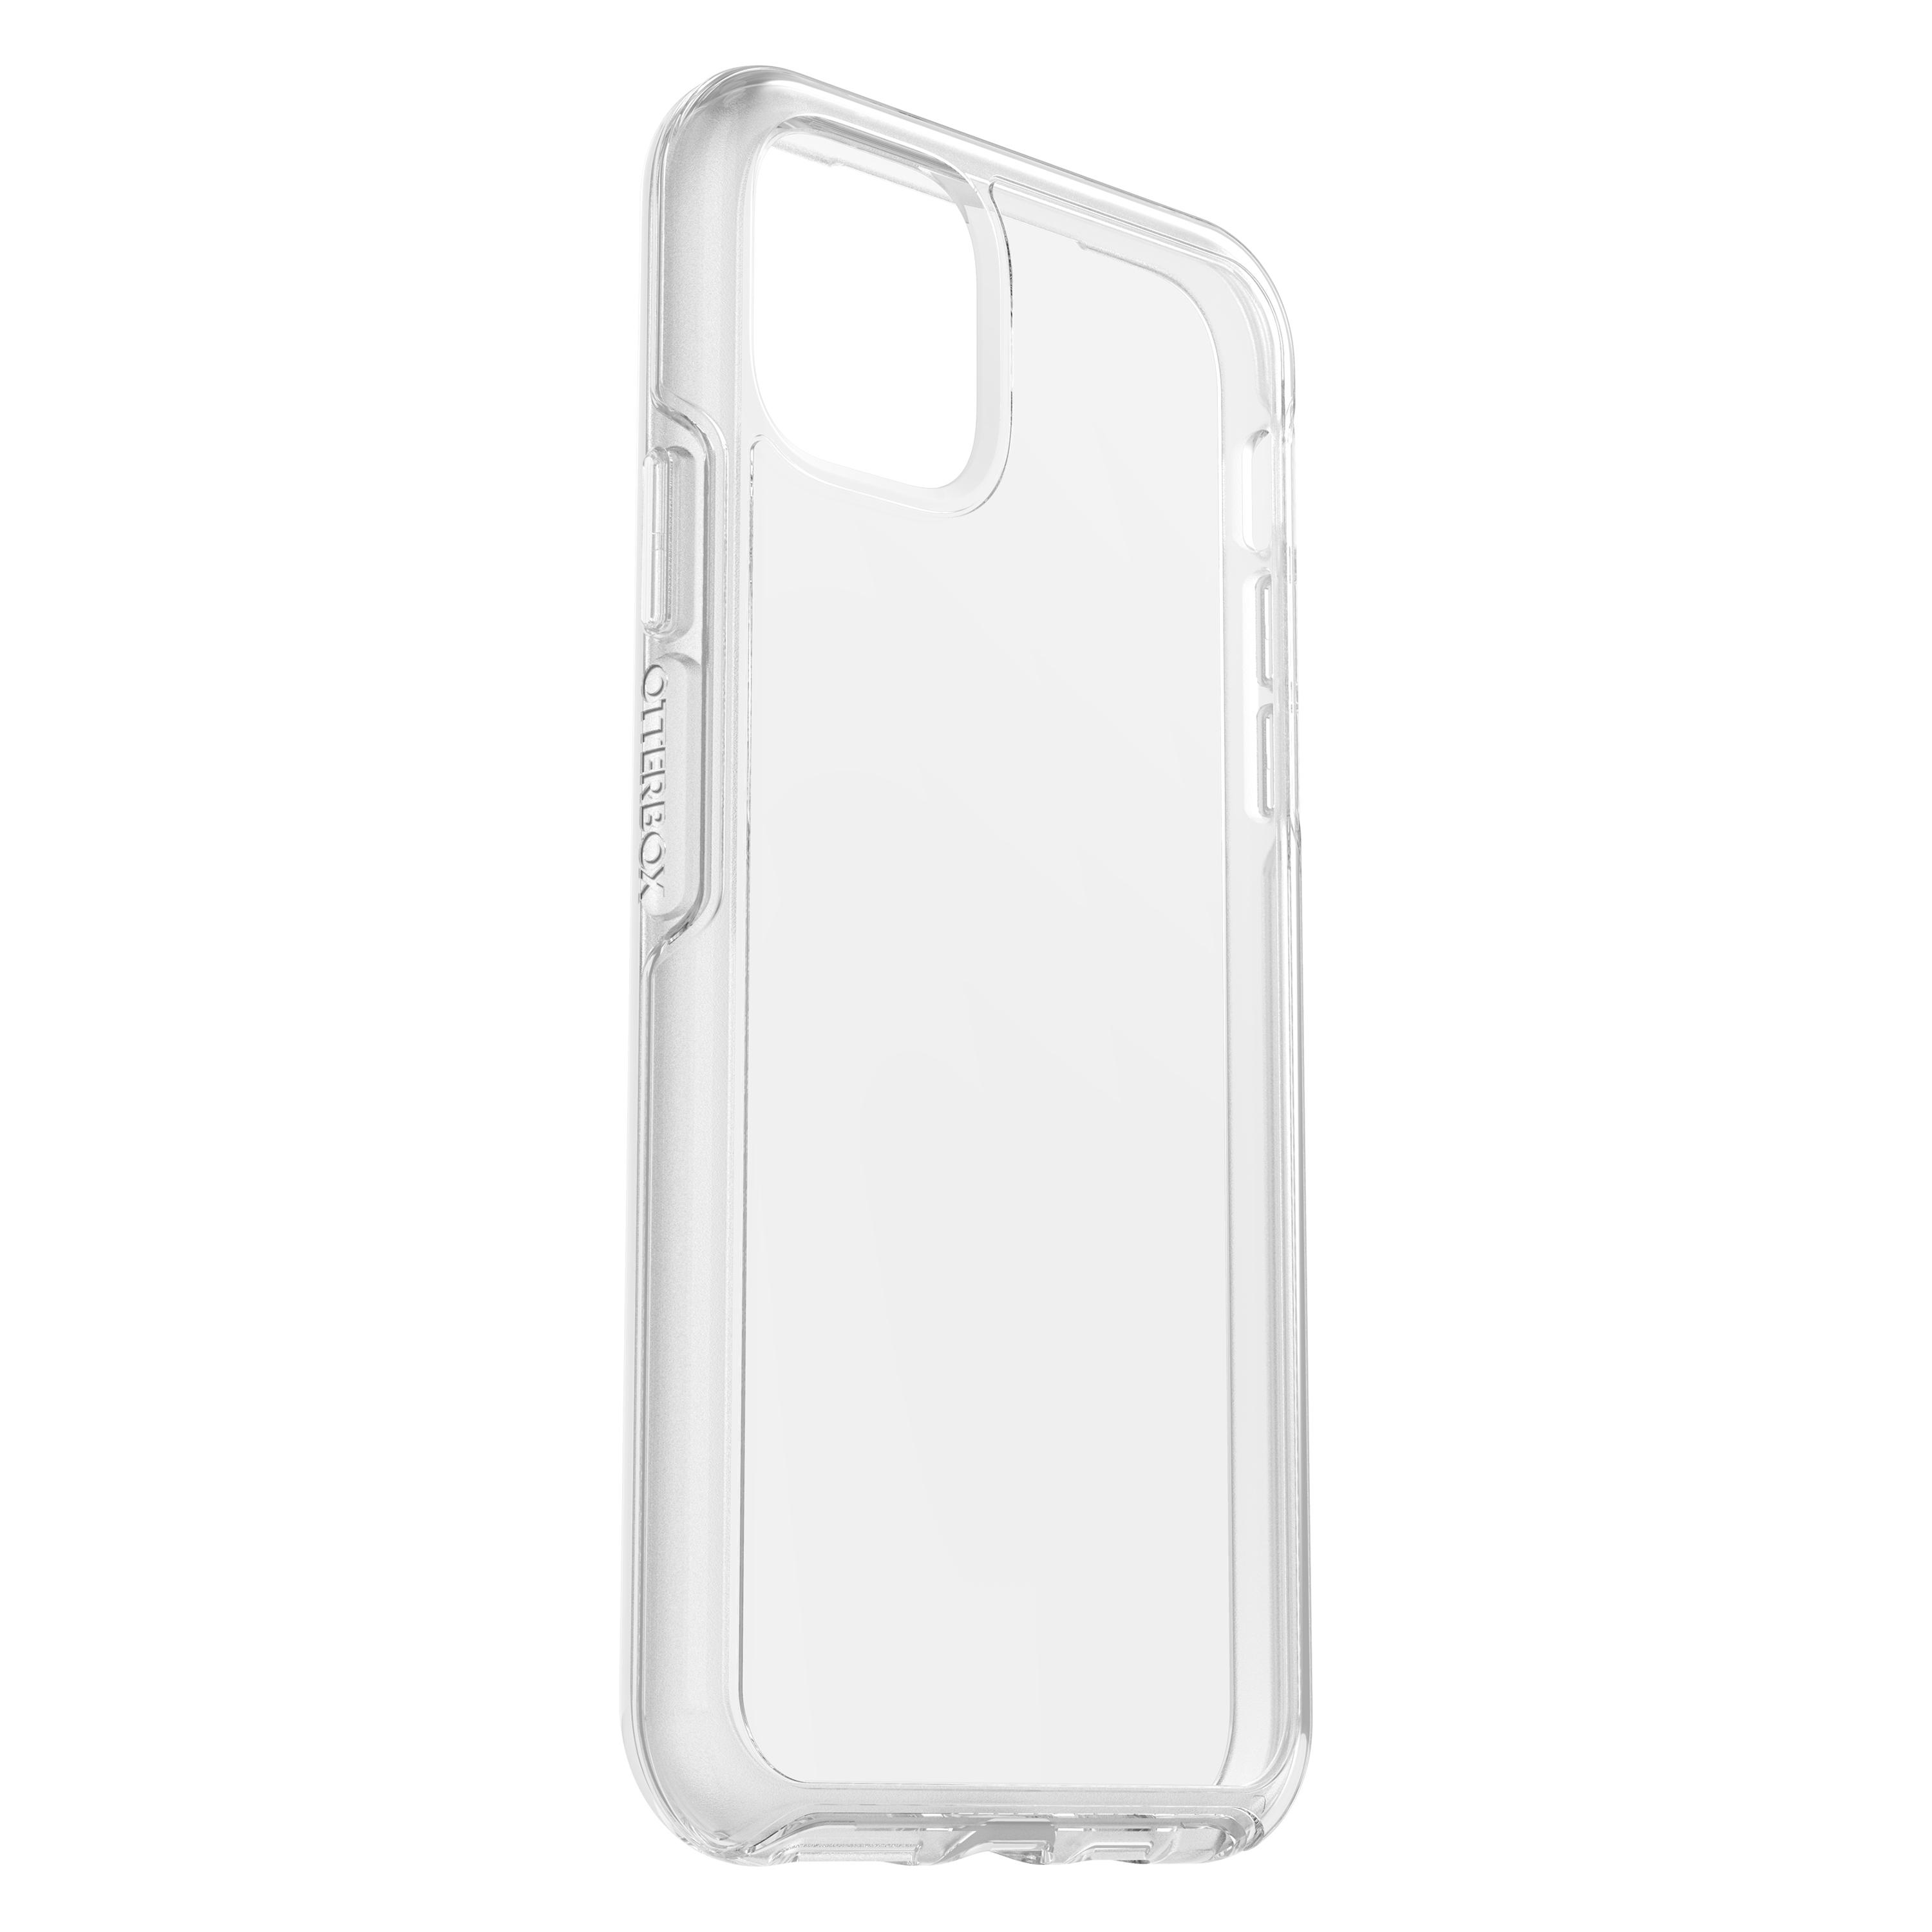 Backcover, Symmetry Clear, Apple, iPhone Max, OTTERBOX 11 Pro Transparent